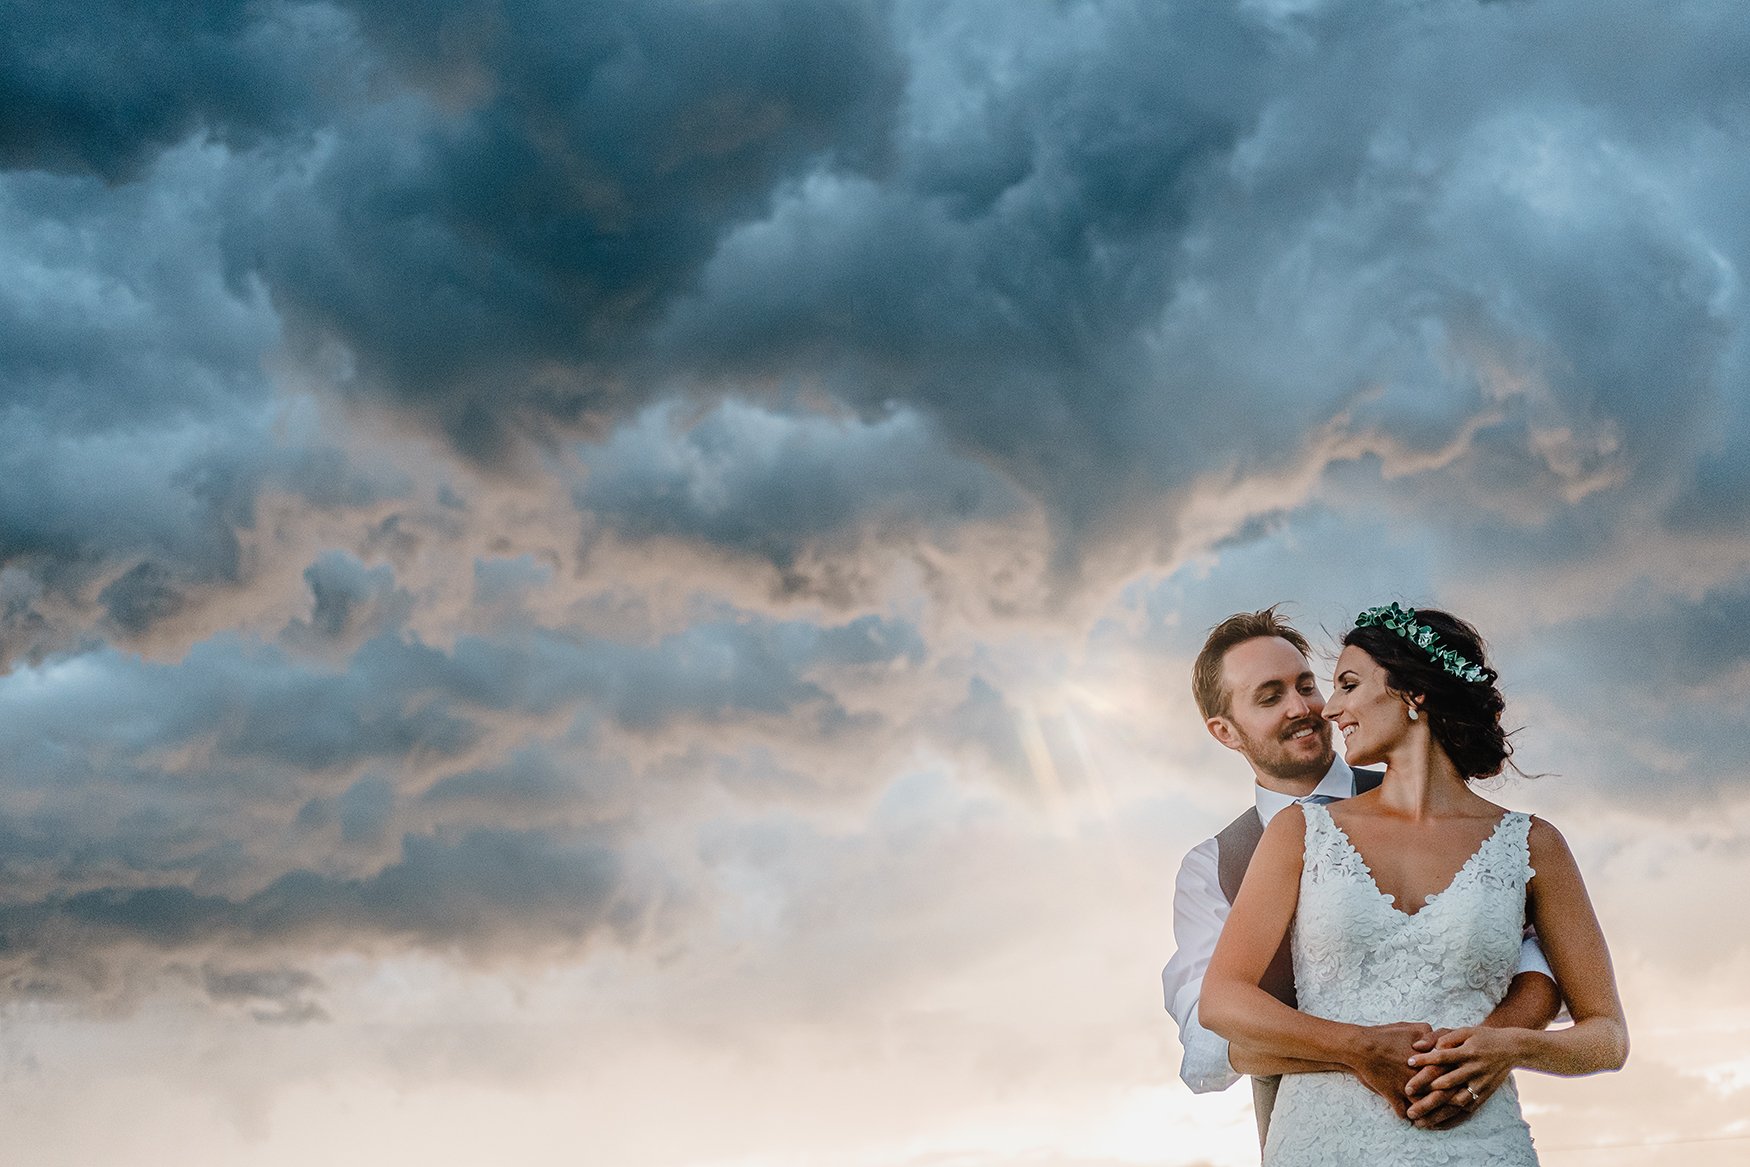 Photograph of a couple on their wedding day in front of an incredible sky (Copy)